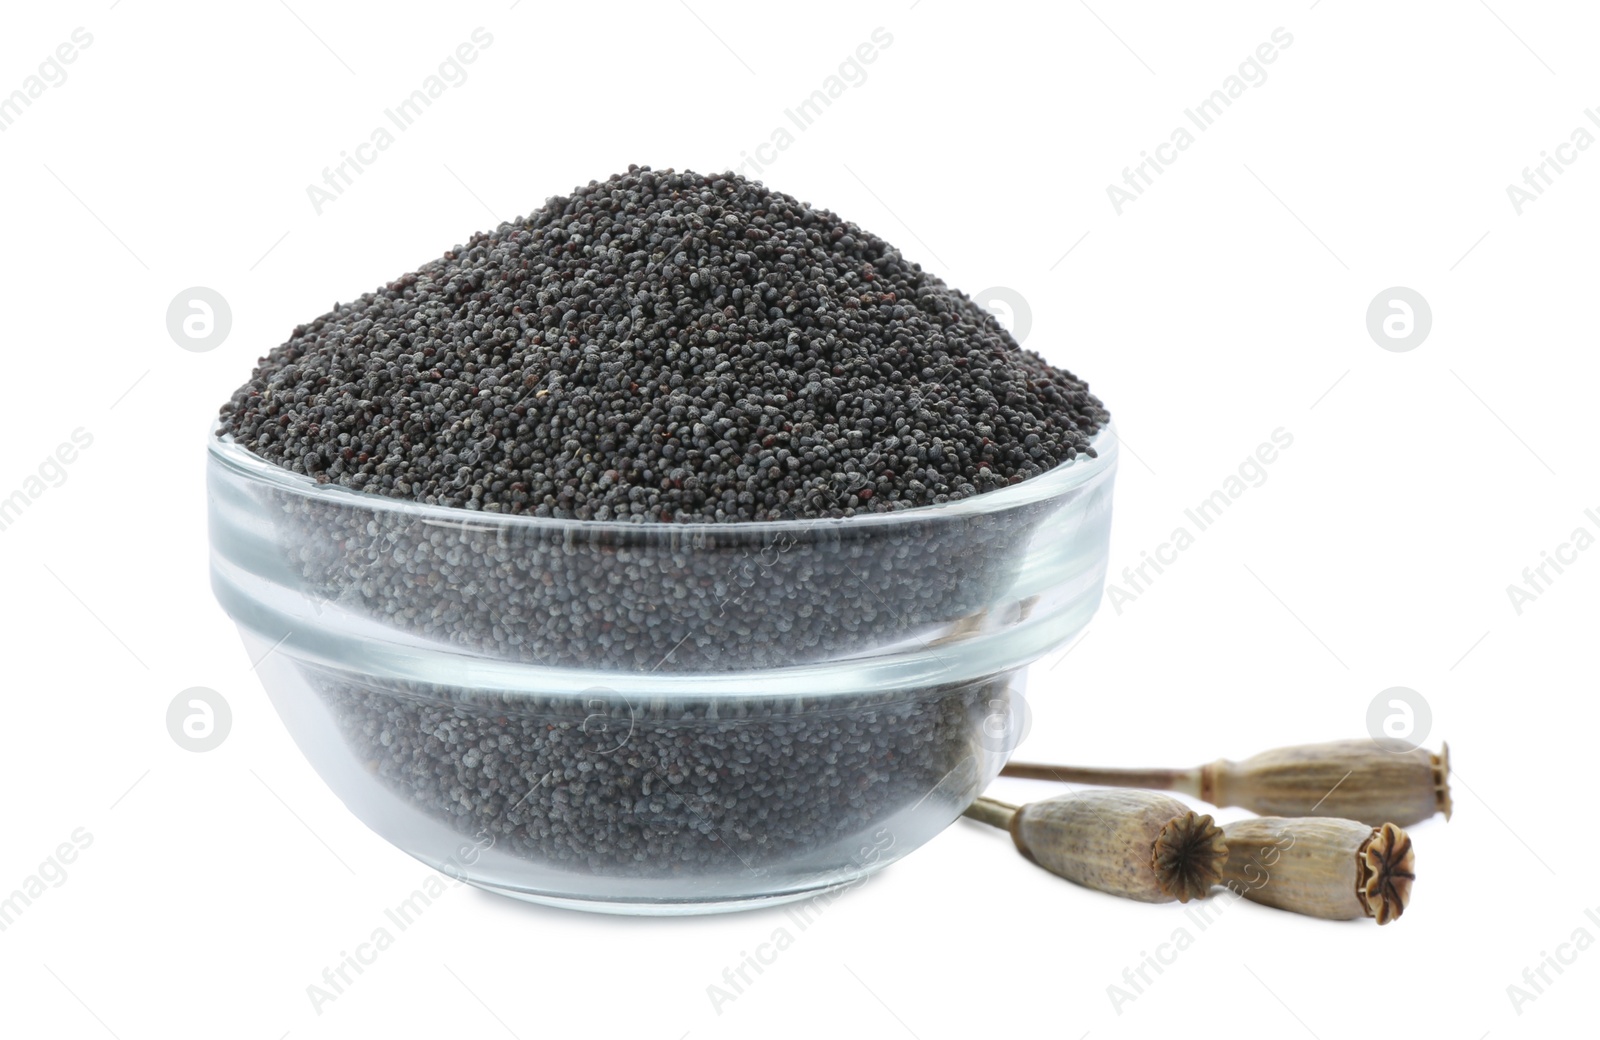 Photo of Poppy seeds in glass bowl isolated on white